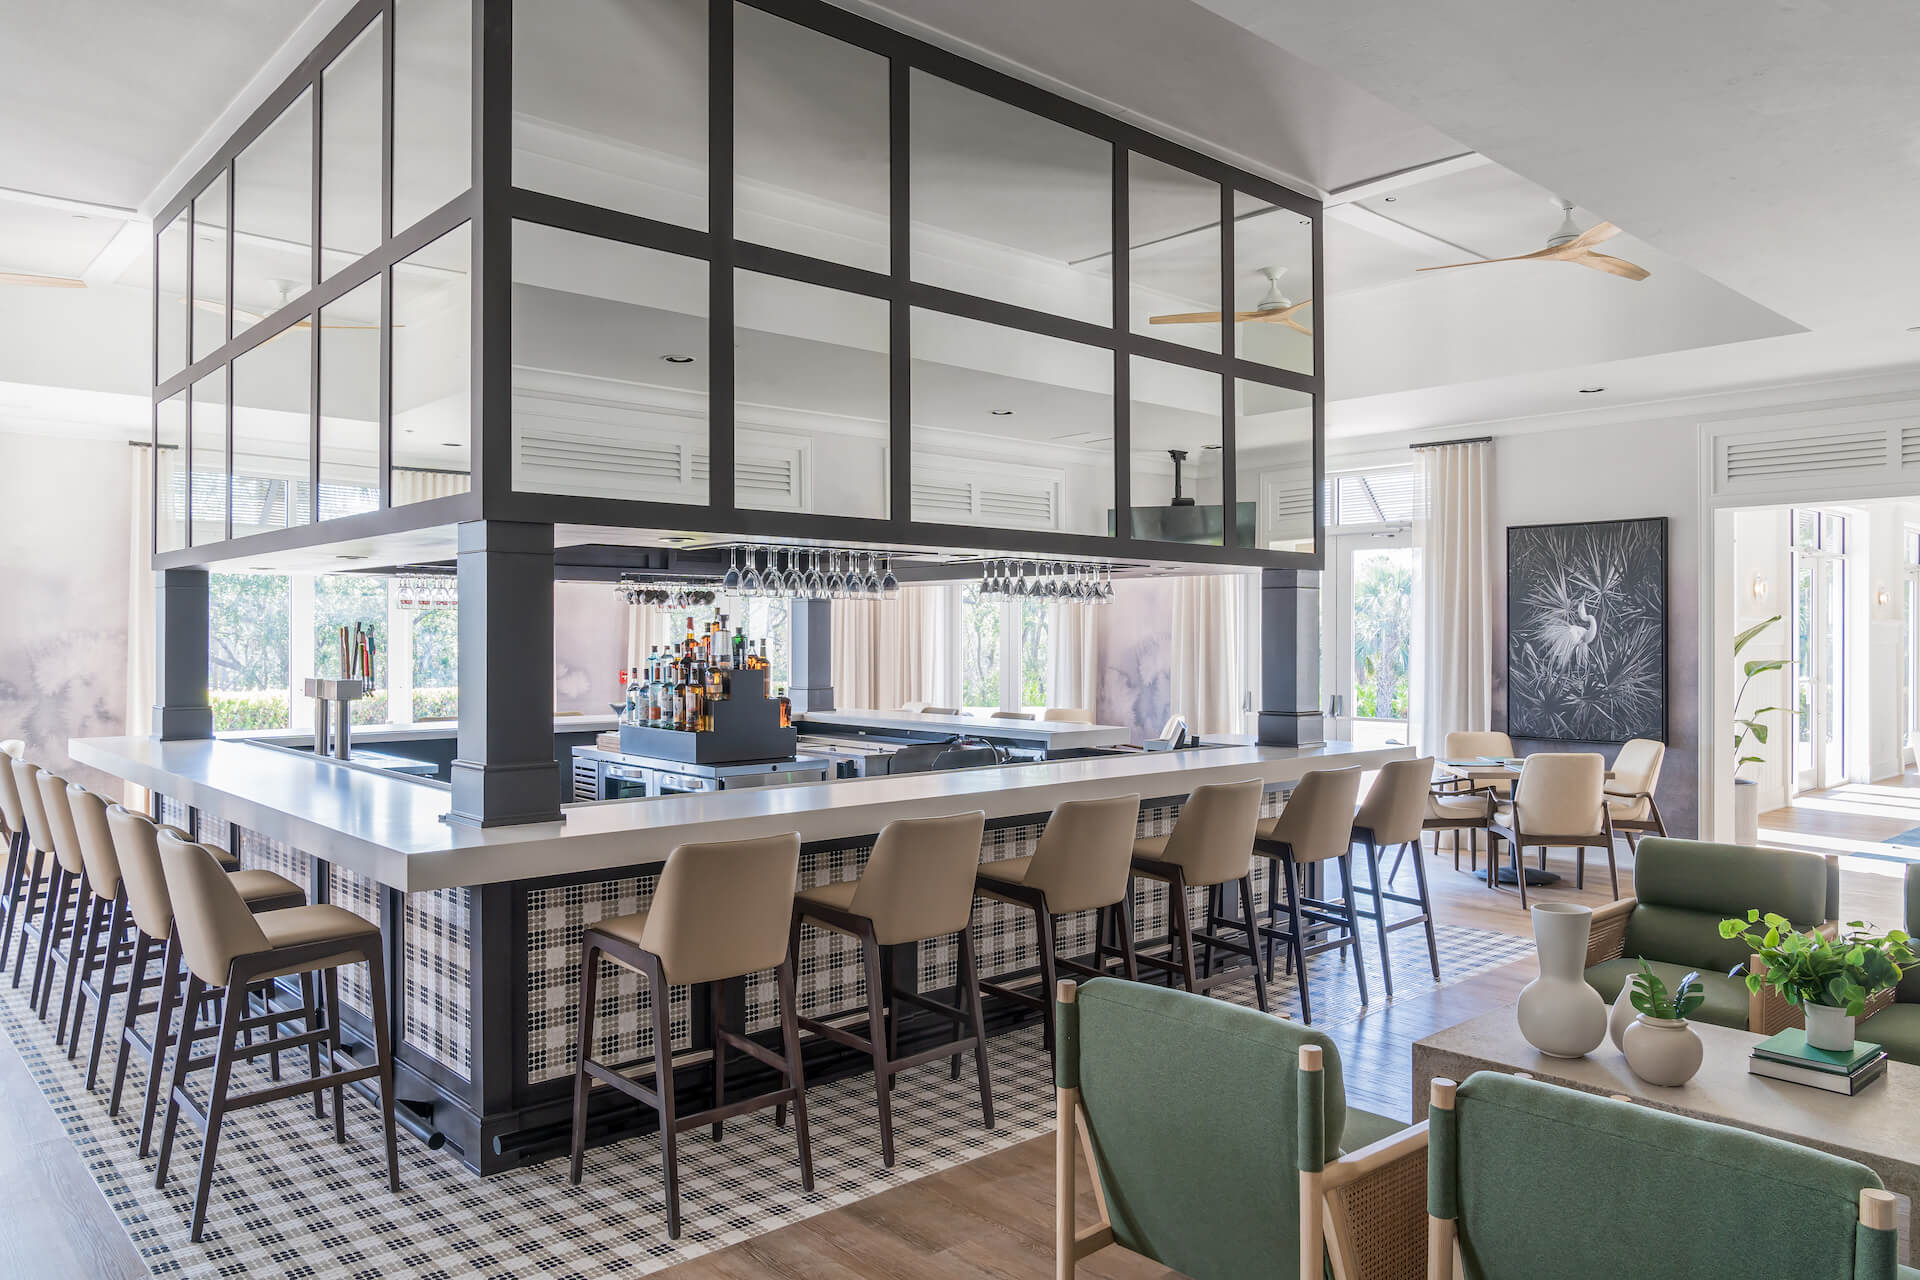 Modern kitchen and bar with seating at the restaurant within the clubhouse at Saltleaf Golf Preserve